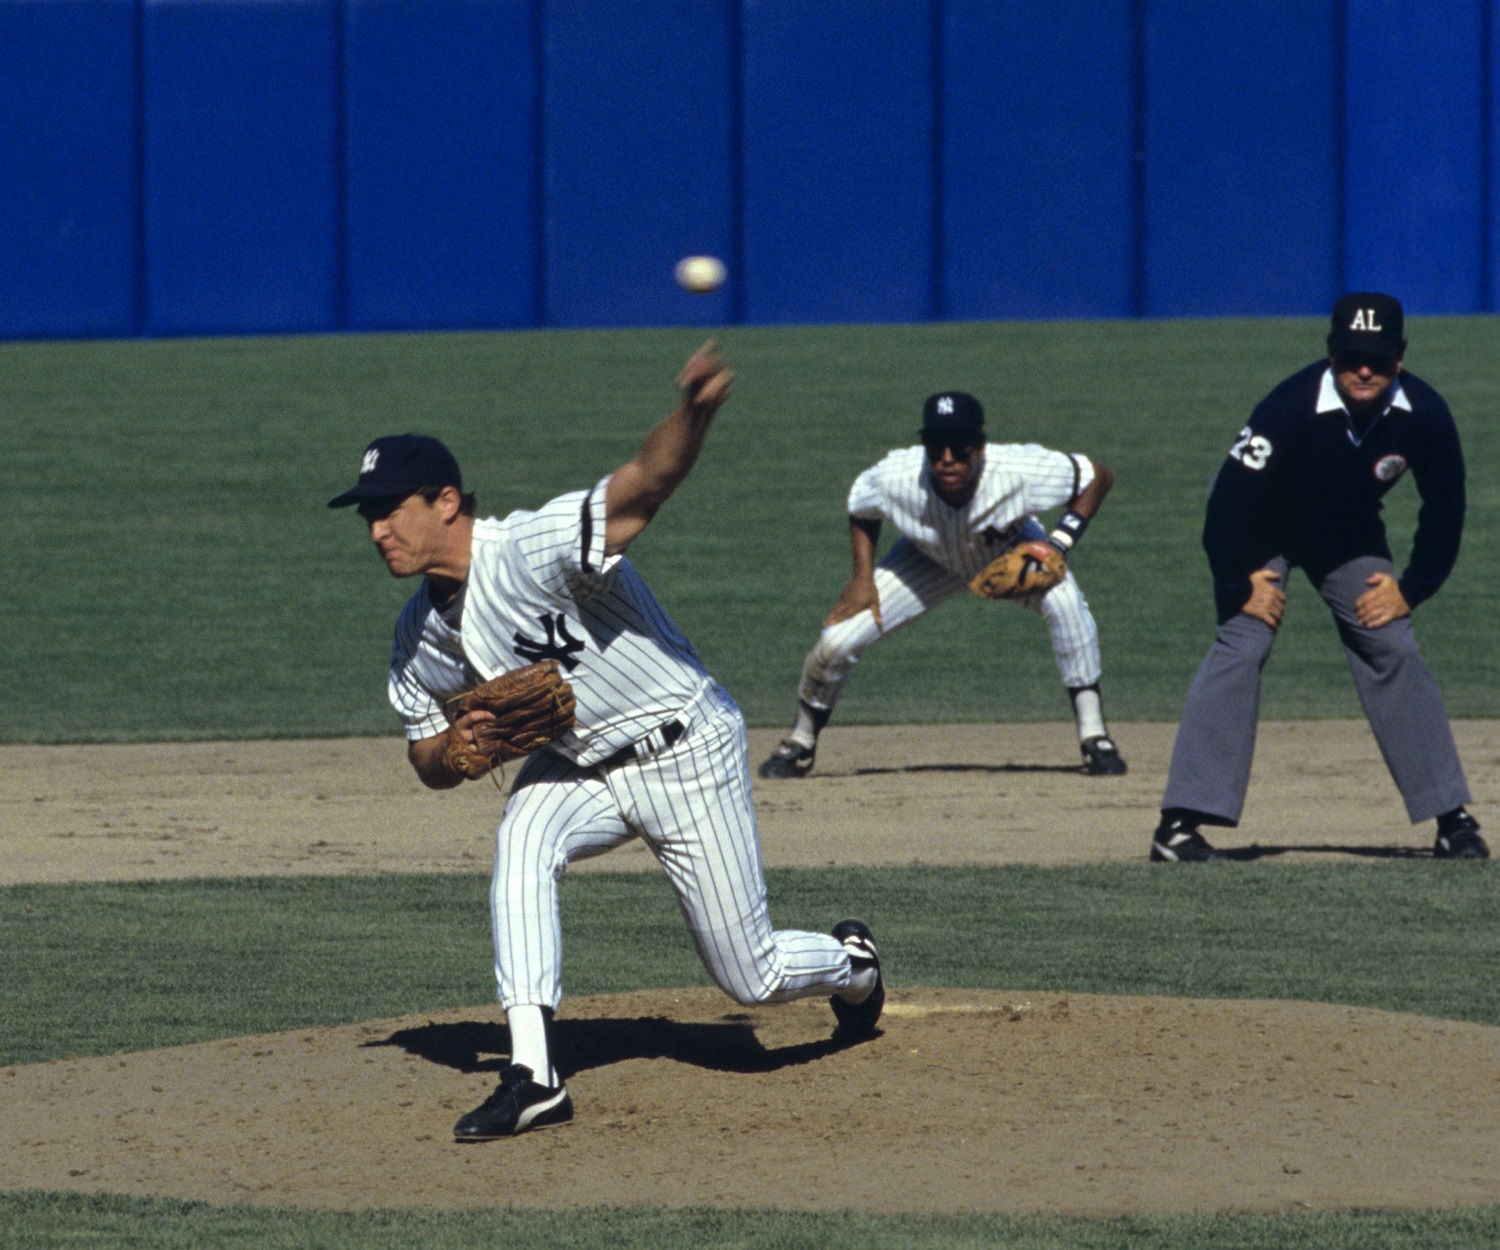 Dave Righetti's 1983 no-hitter was his last career shutout. He went o to become one of the game's top closers.